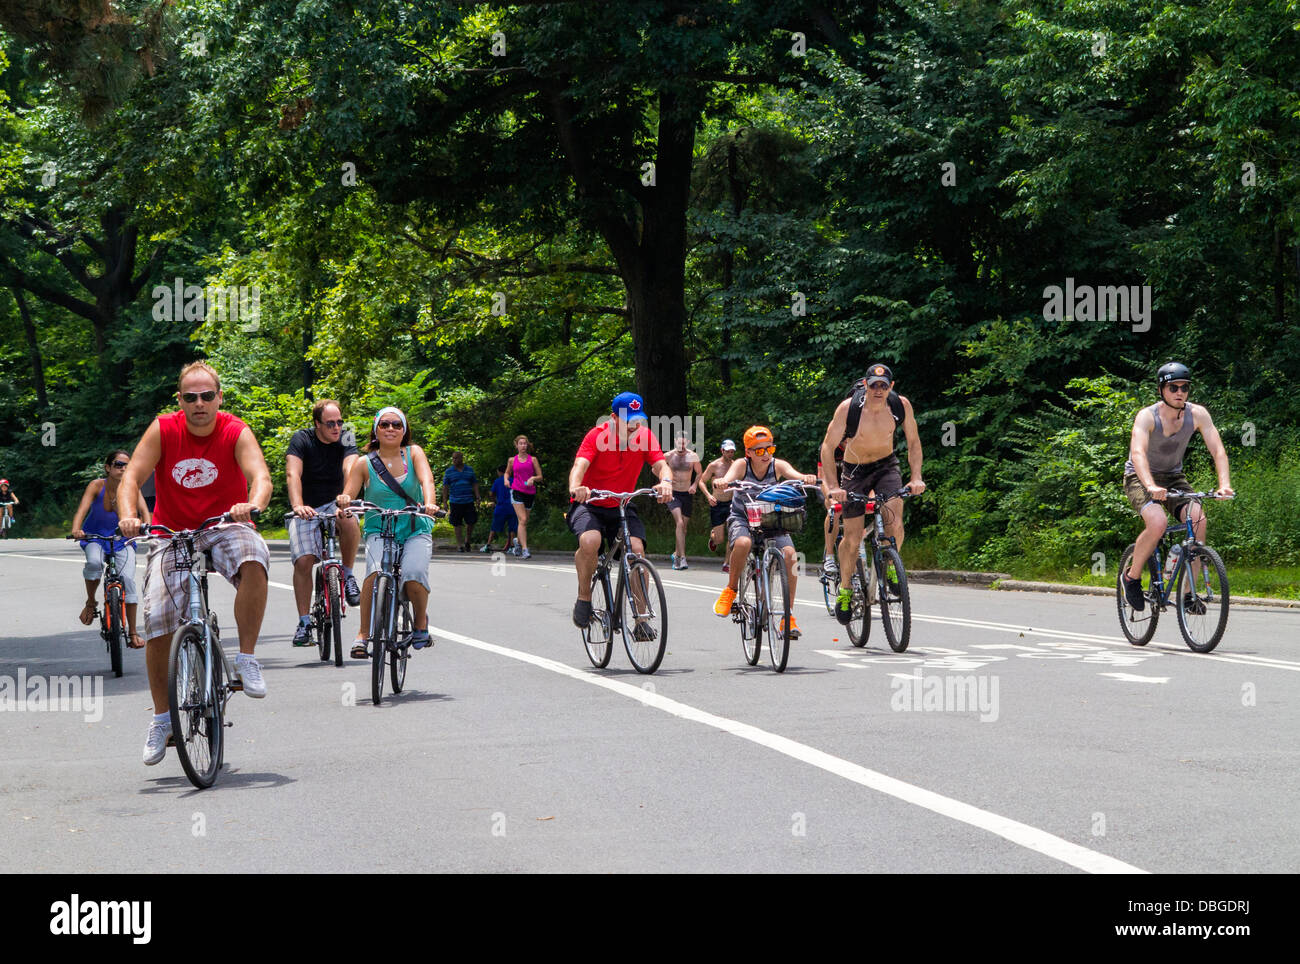 Cycling In Central Park New York City Cyclists Stock Photo with cycling in central park for Your home